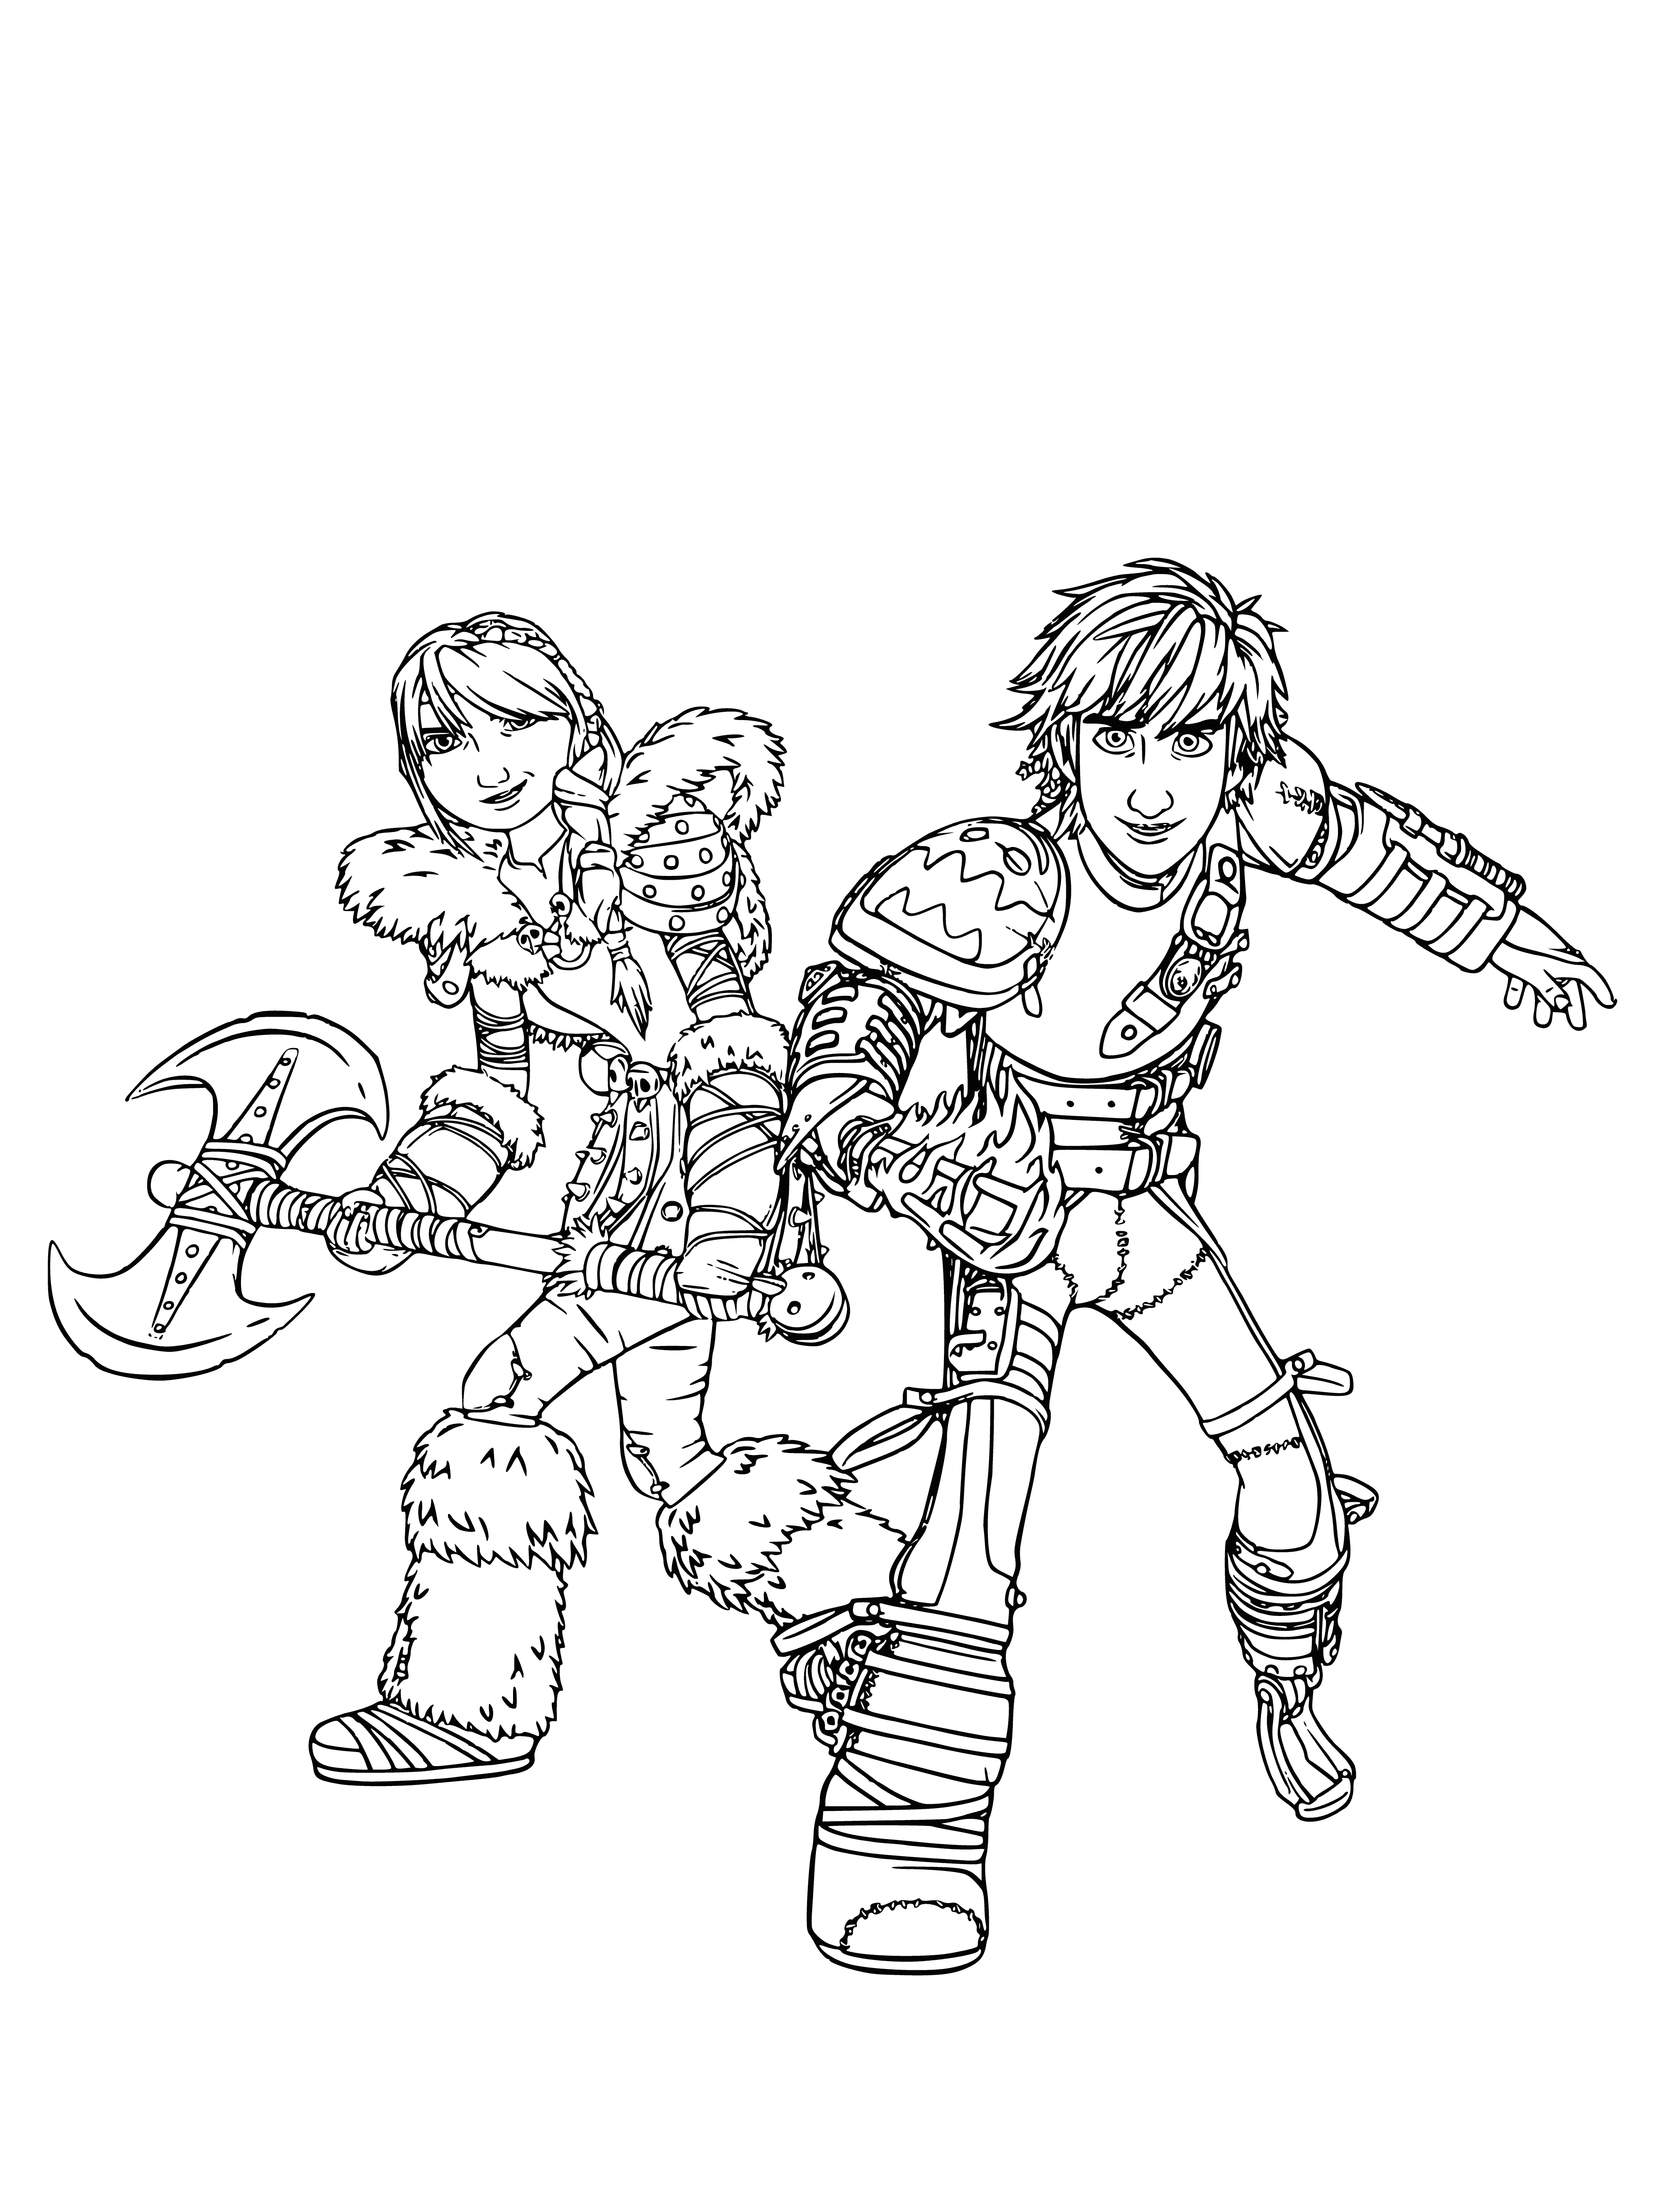 Icking and Astrid coloring page